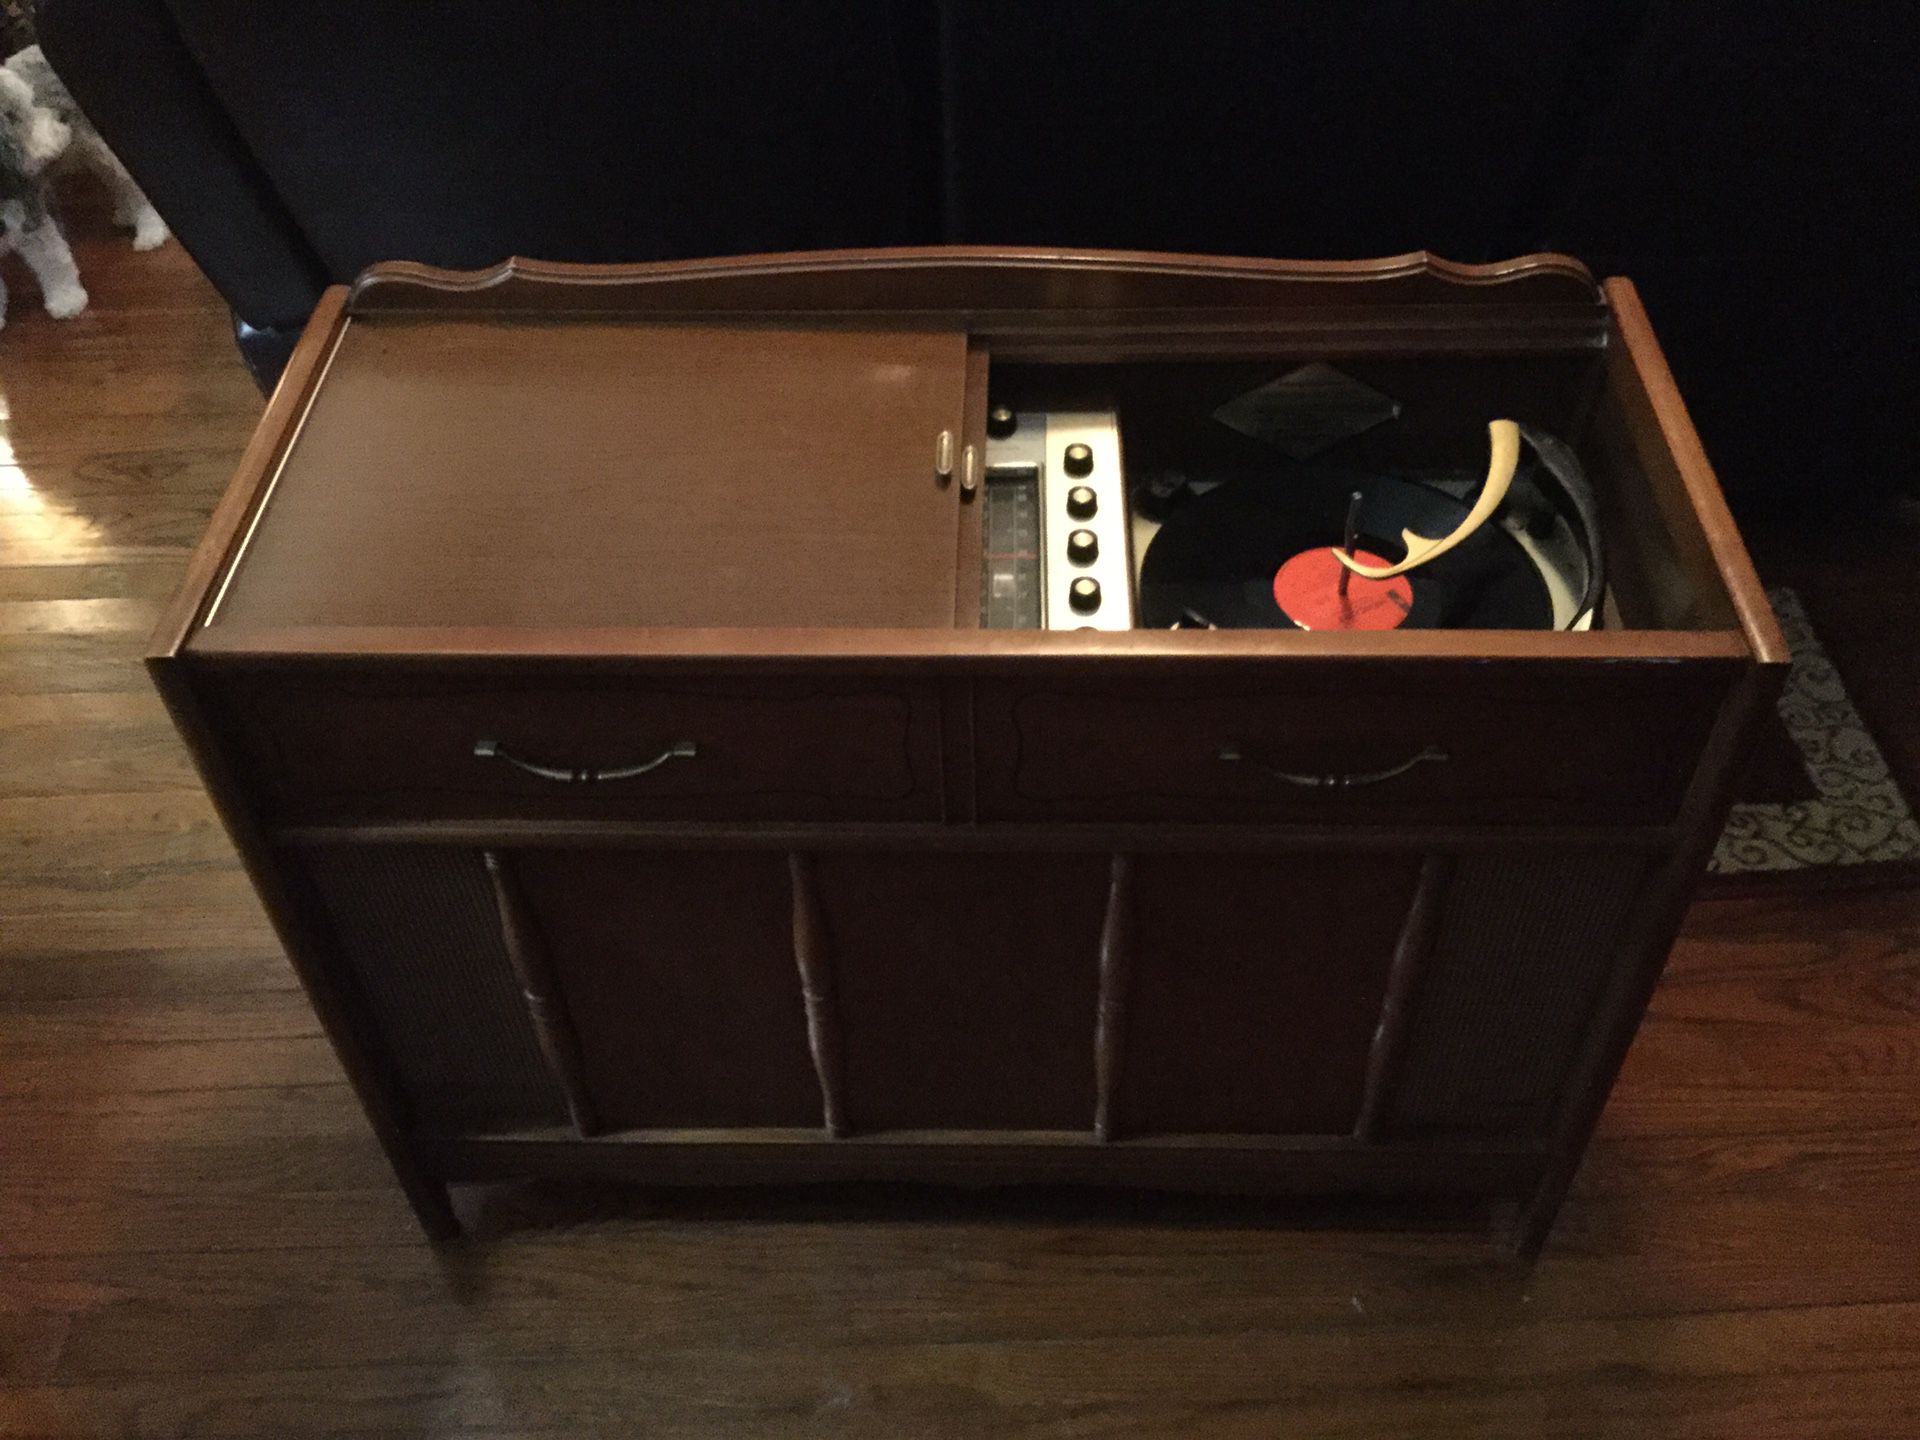 Early 1960s Magnavox Micromatic console stereo. Beautiful cabinet and excellent condition for age. All original